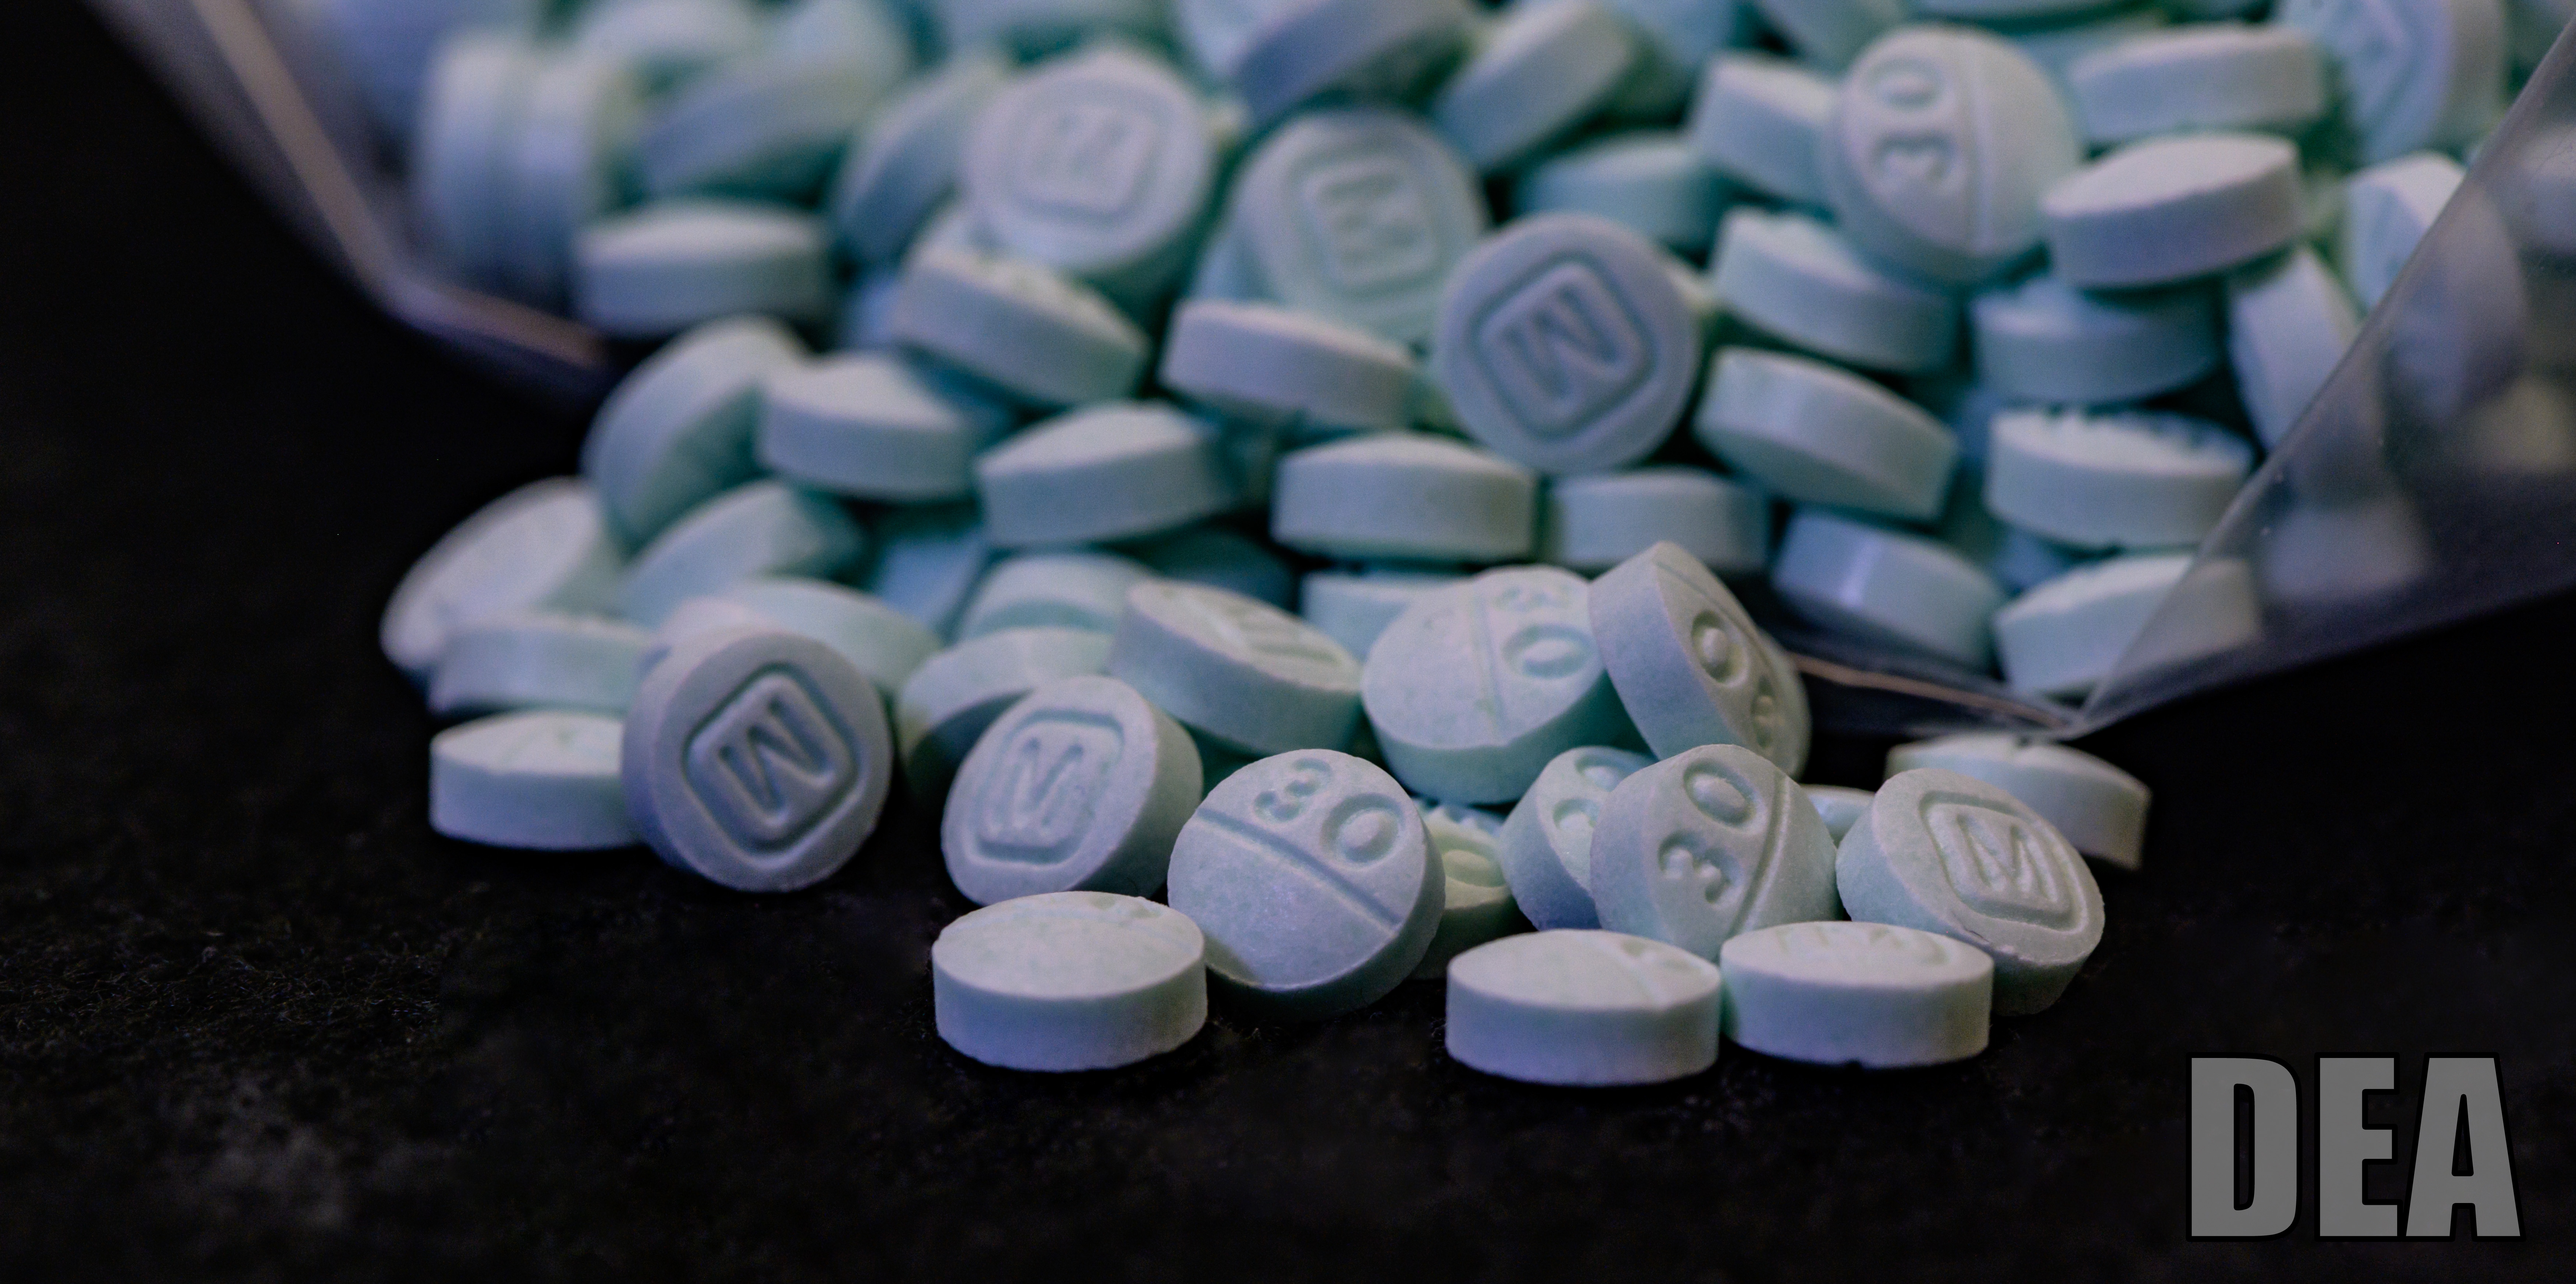 An addiction expert on how to fight Oregon's growing fentanyl crisis - OPB